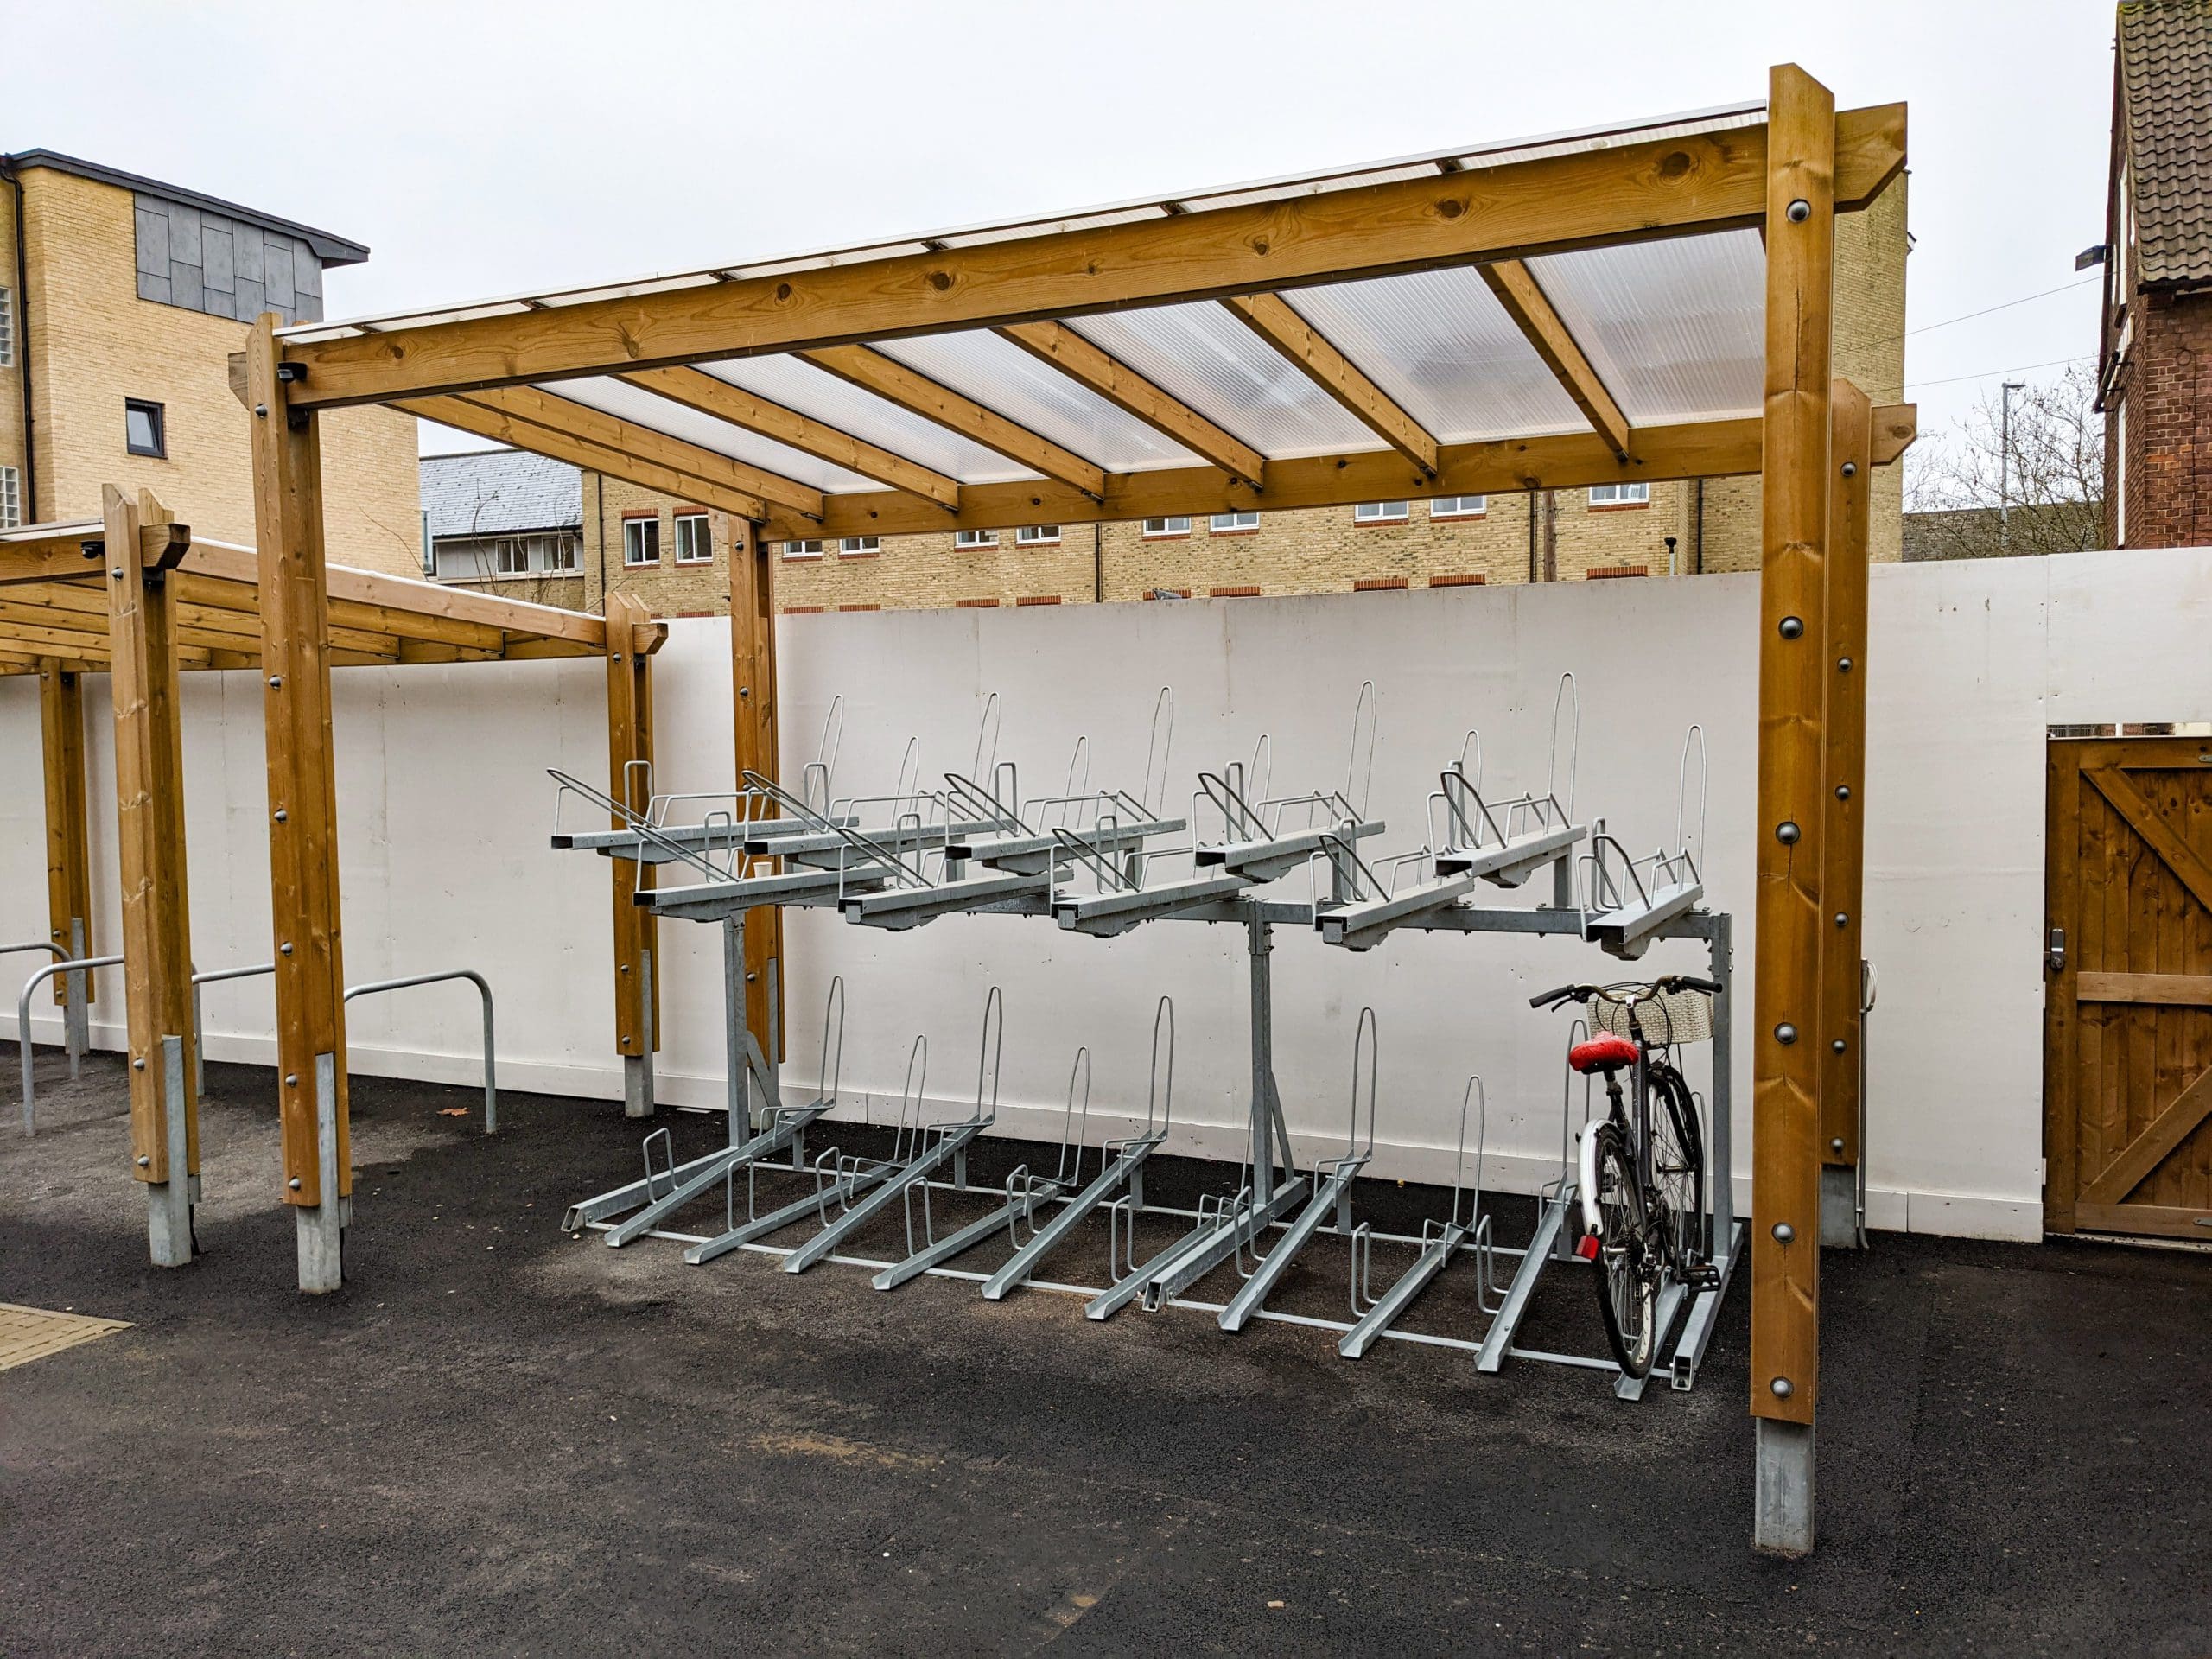 wooden pergola bike shelter with metal hoops and attachments